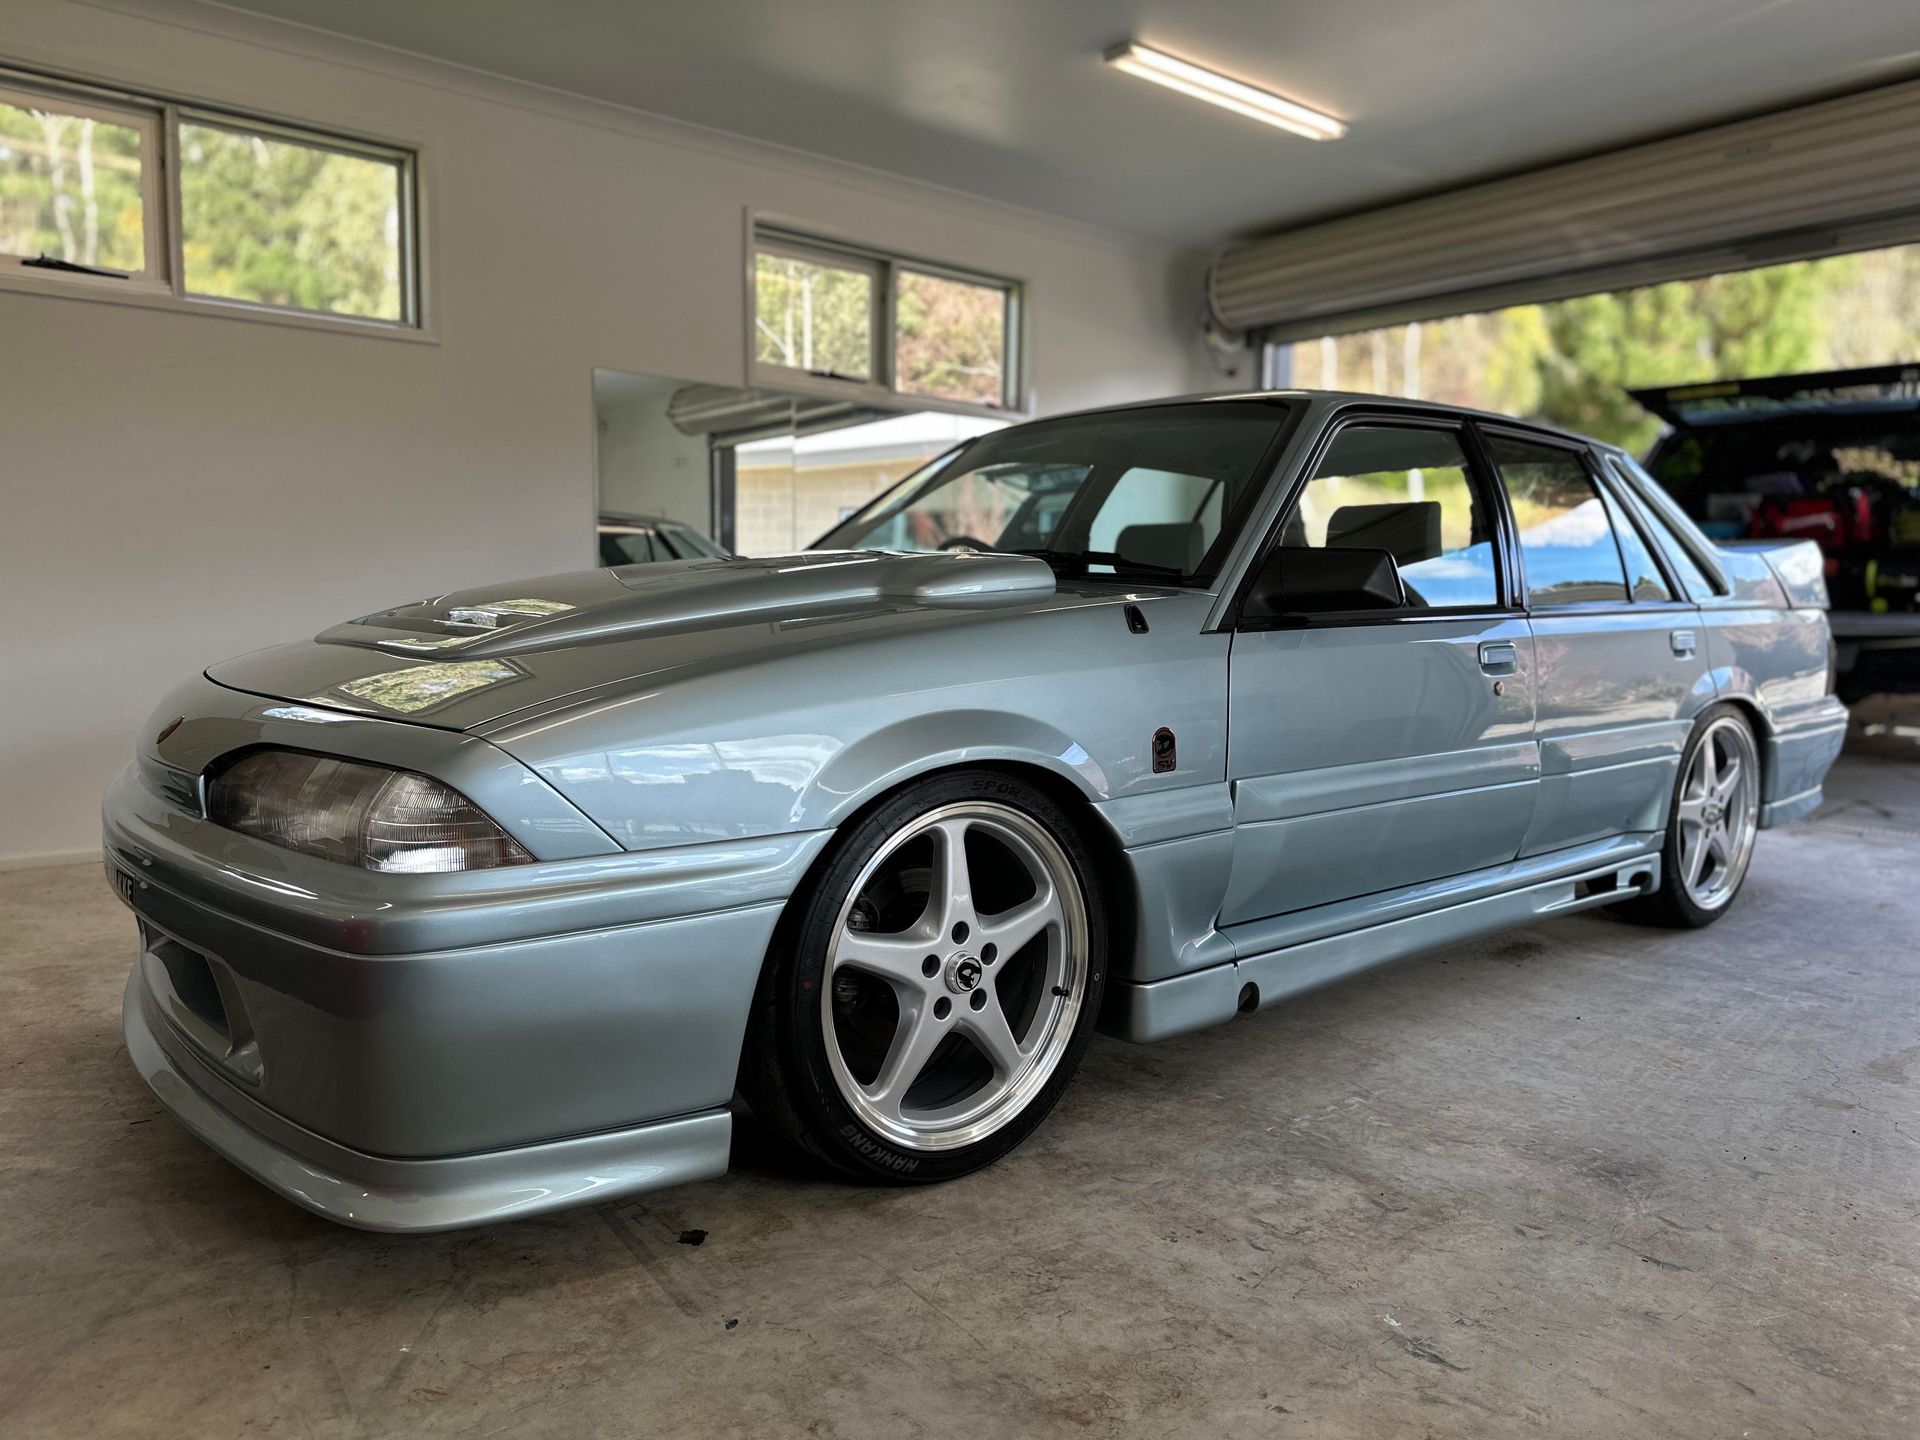 Ceramic Coating - Genuine HSV Group A Walkinshaw is parked in a garage next to a window